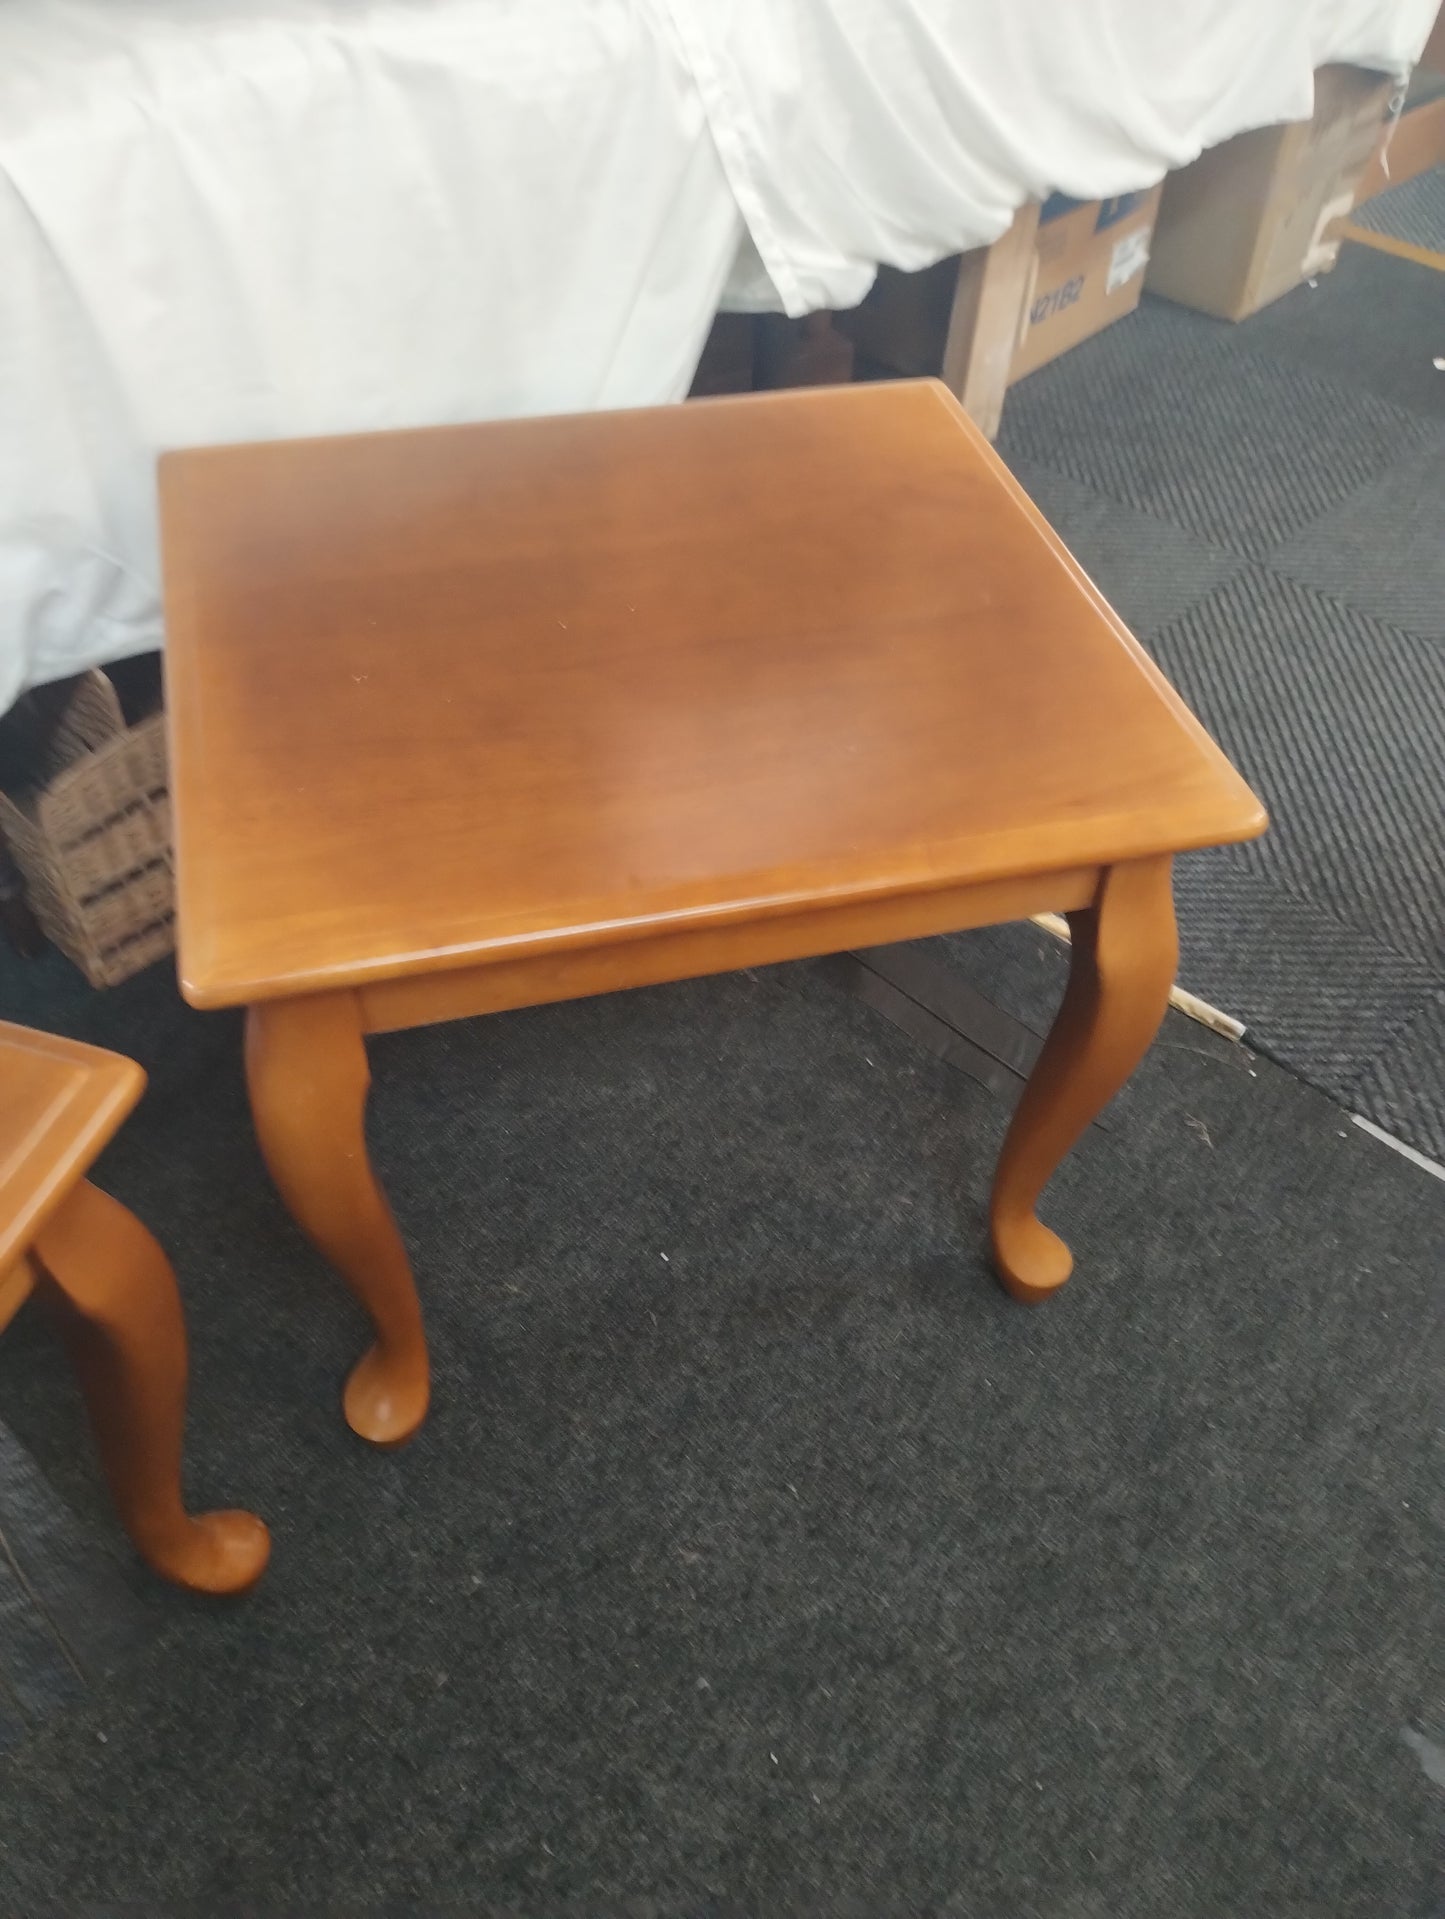 Pair Of Wooden Side Tables